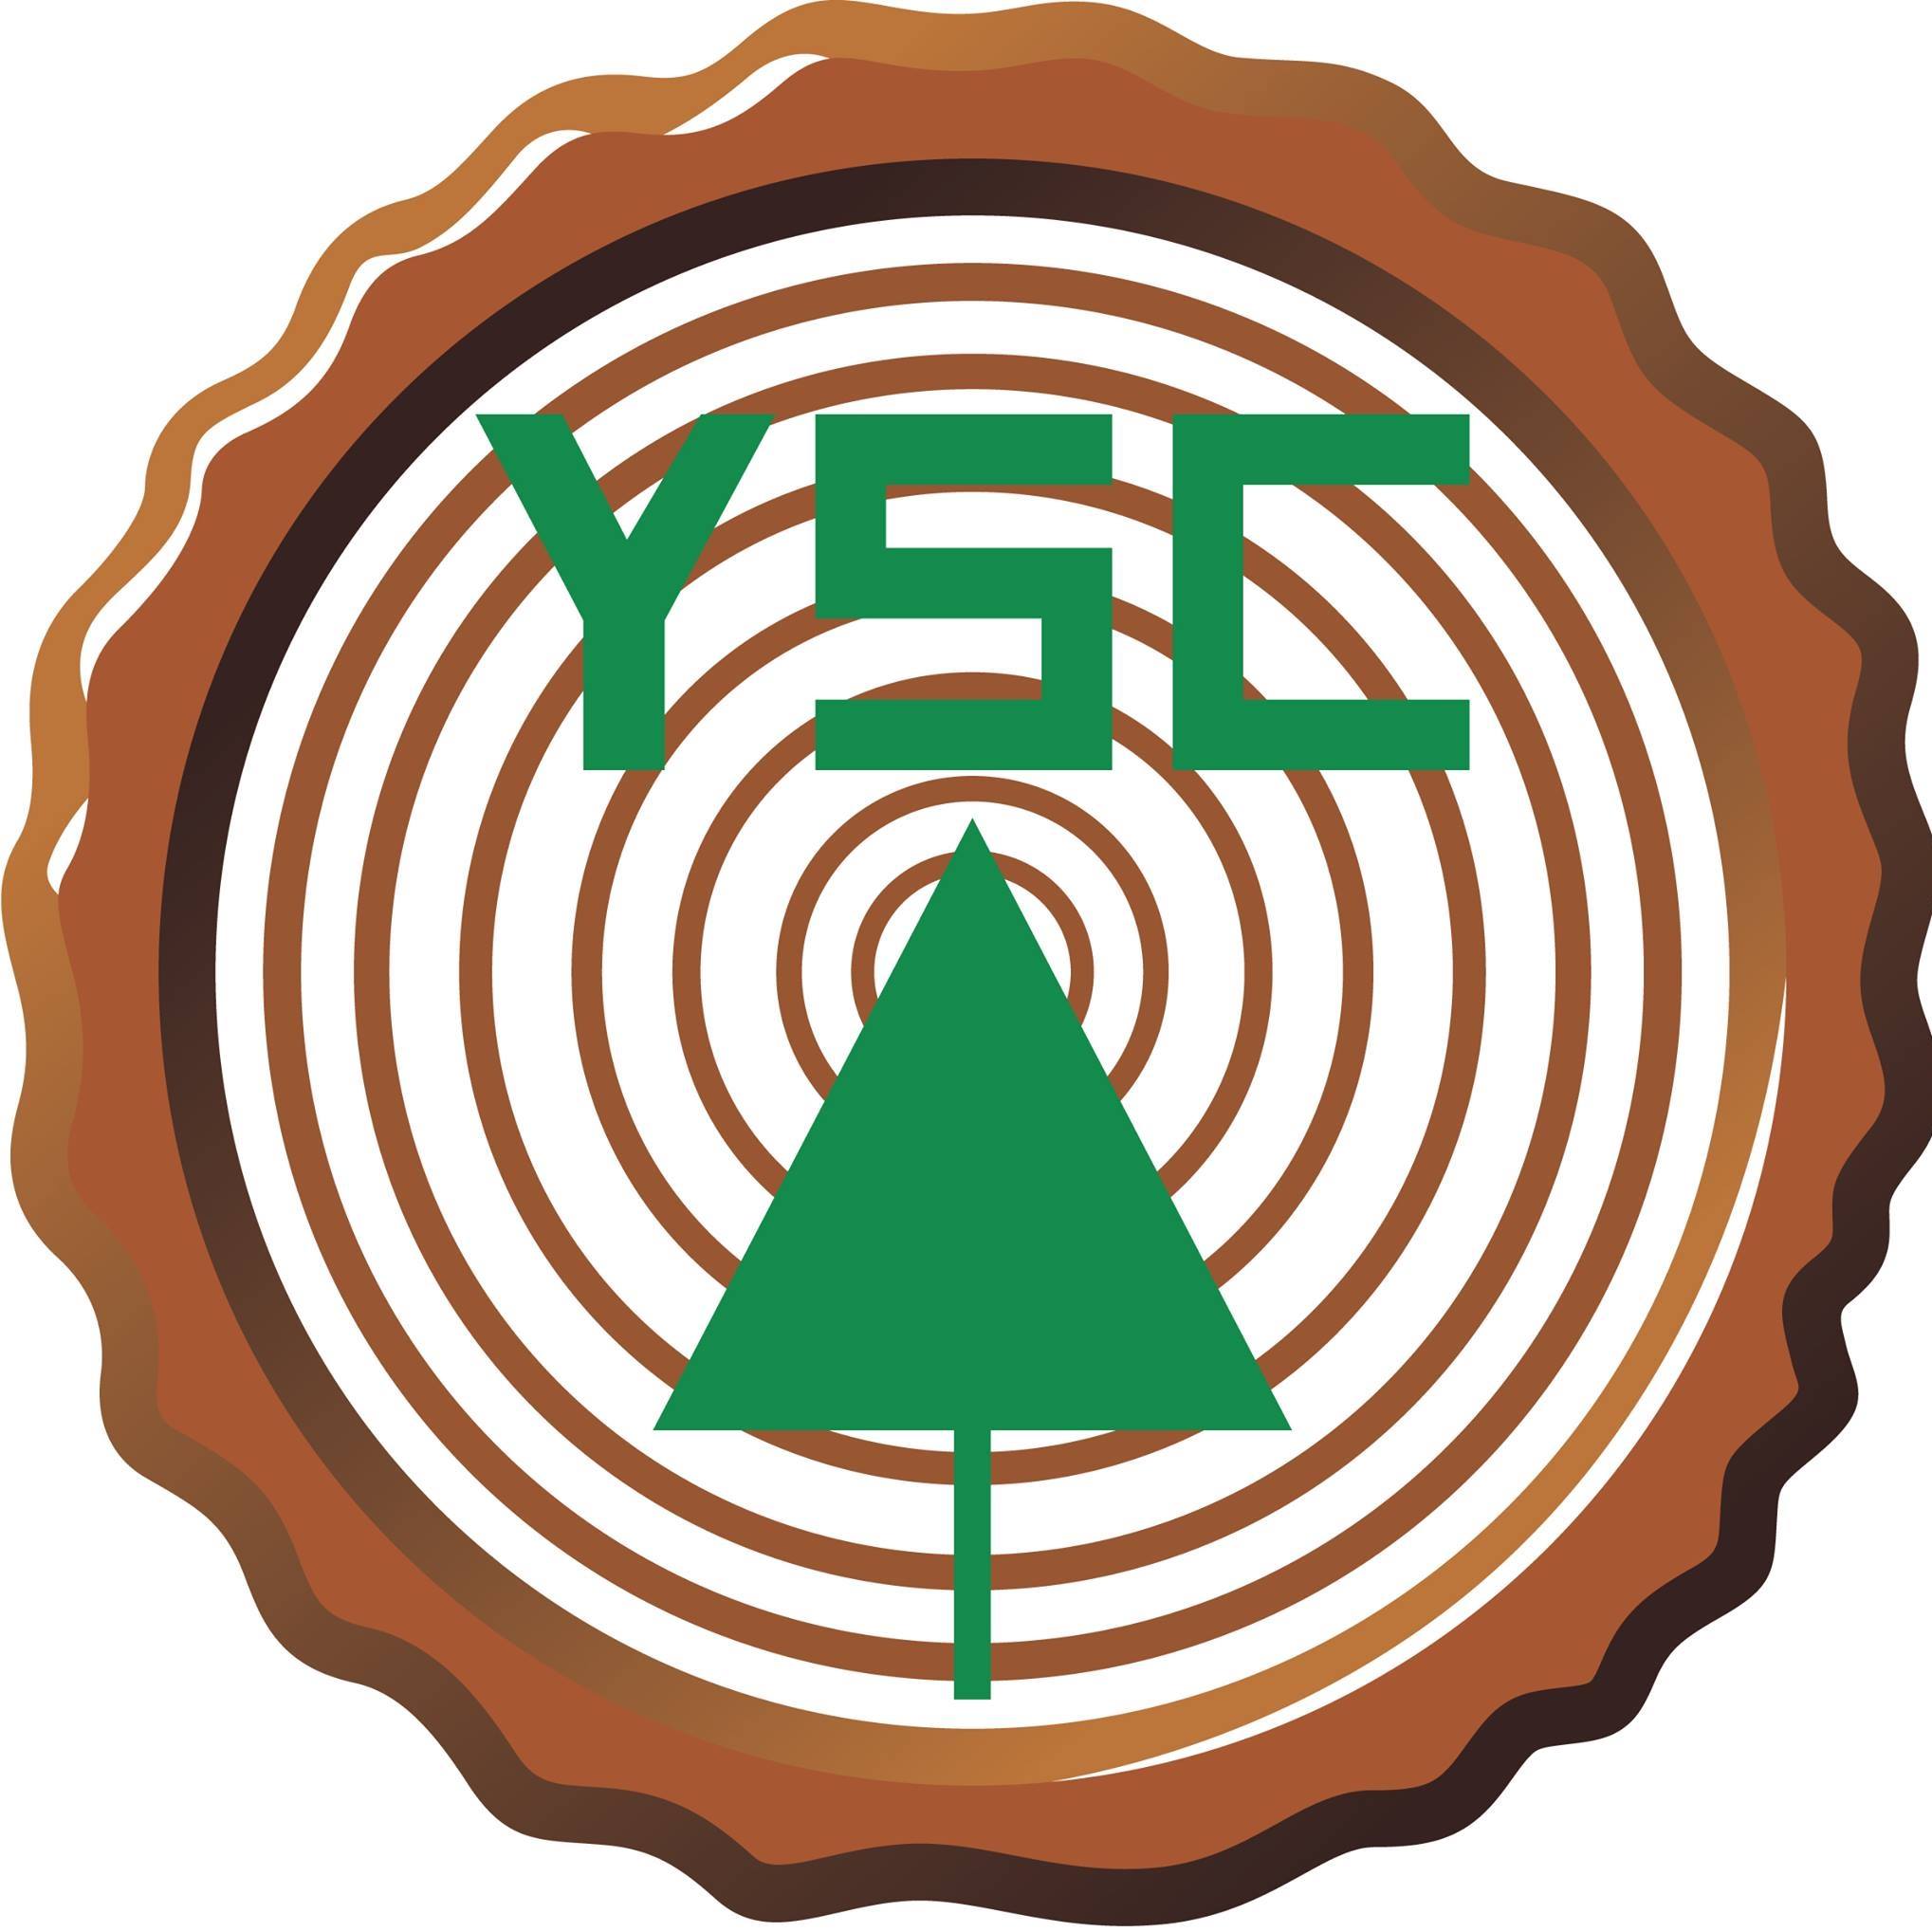 YSC Forest Products Marketing Board Logo